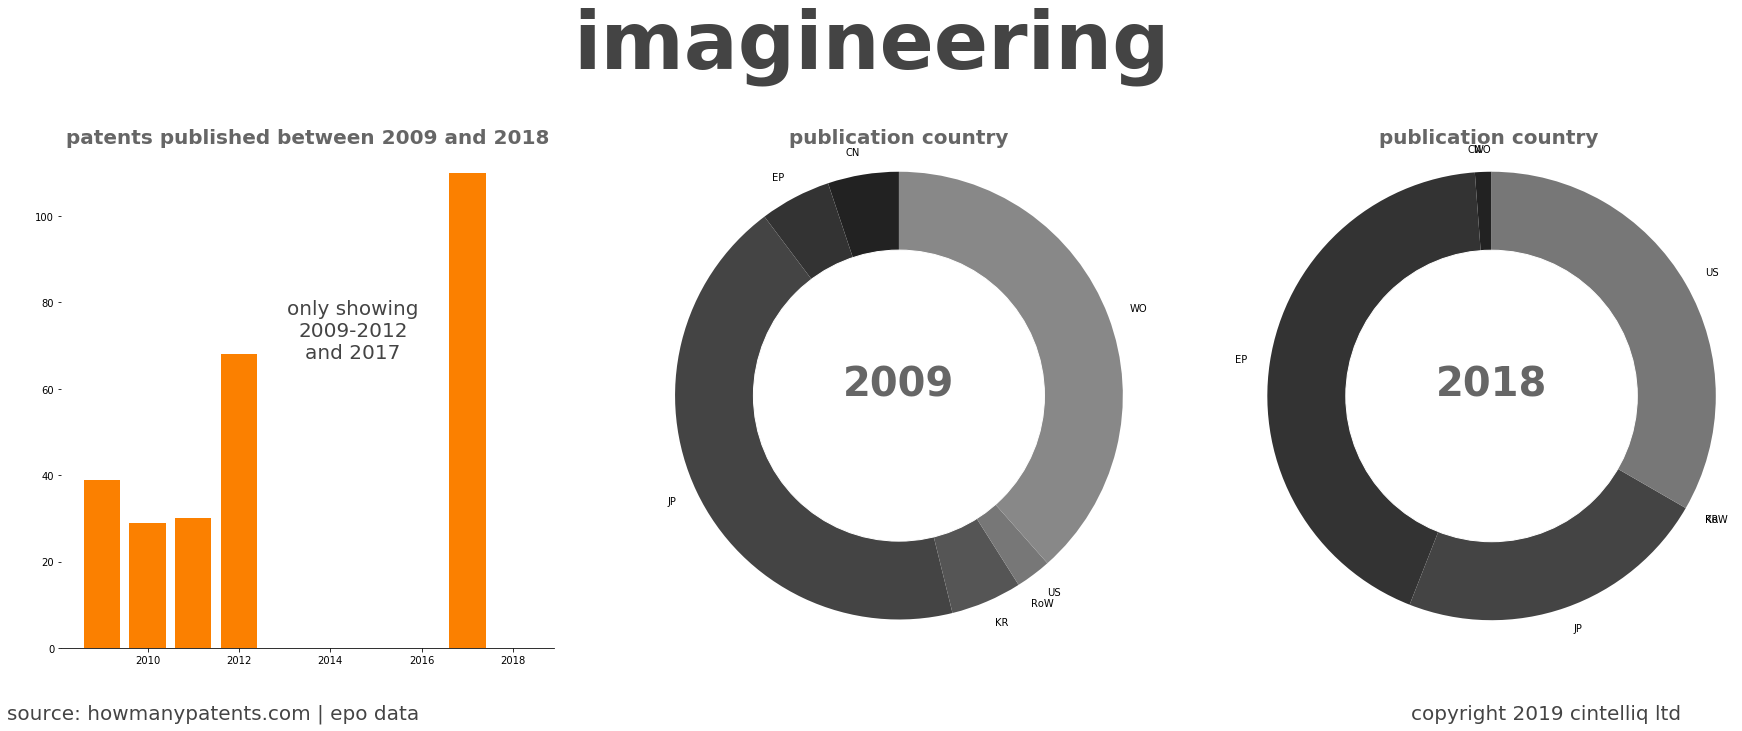 summary of patents for Imagineering